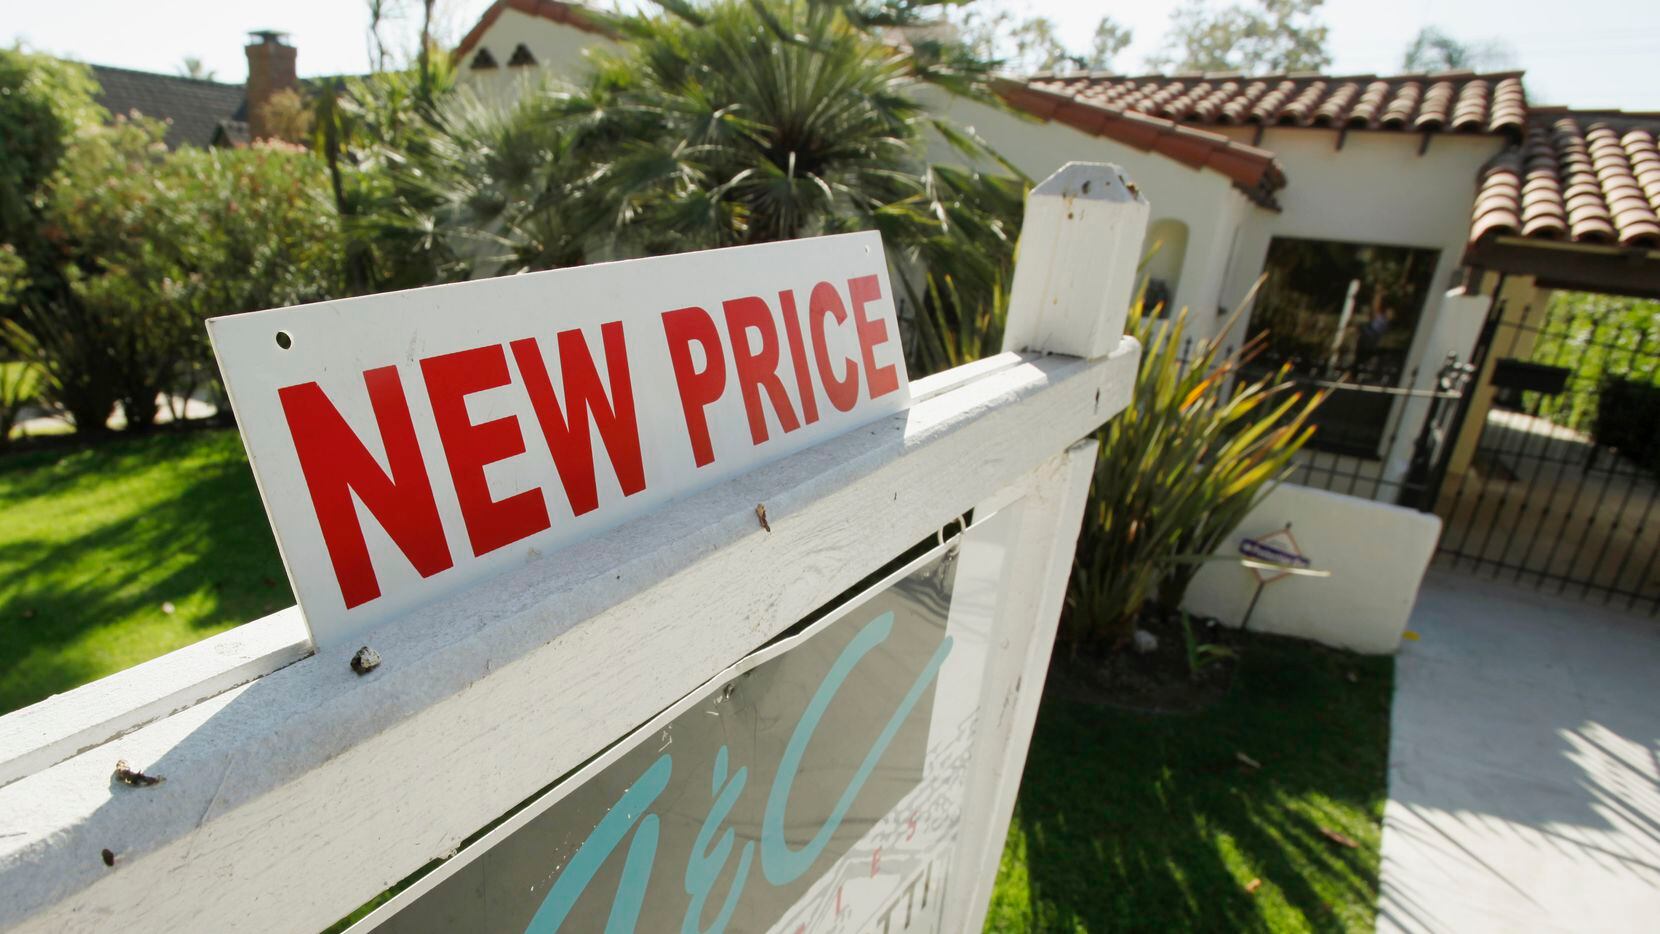 Nationwide home prices were 5.8 percent higher in March than in the same month of 2016.